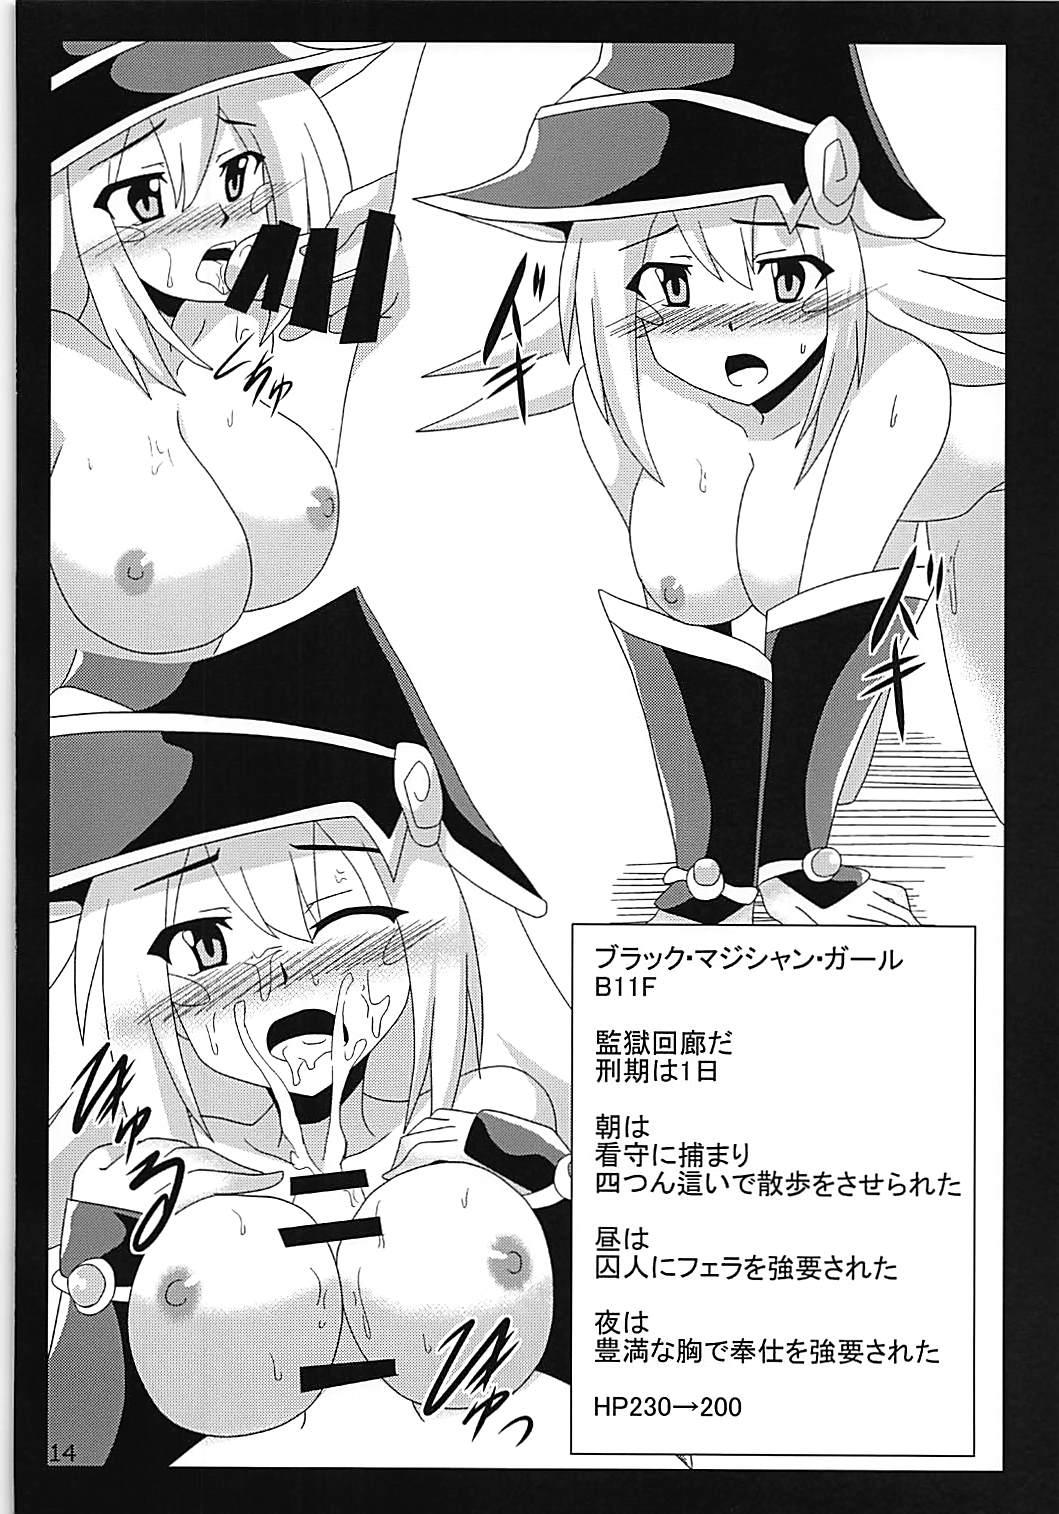 Hair BMG no Ero Trap Dungeon - Yu-gi-oh Private Sex - Page 13